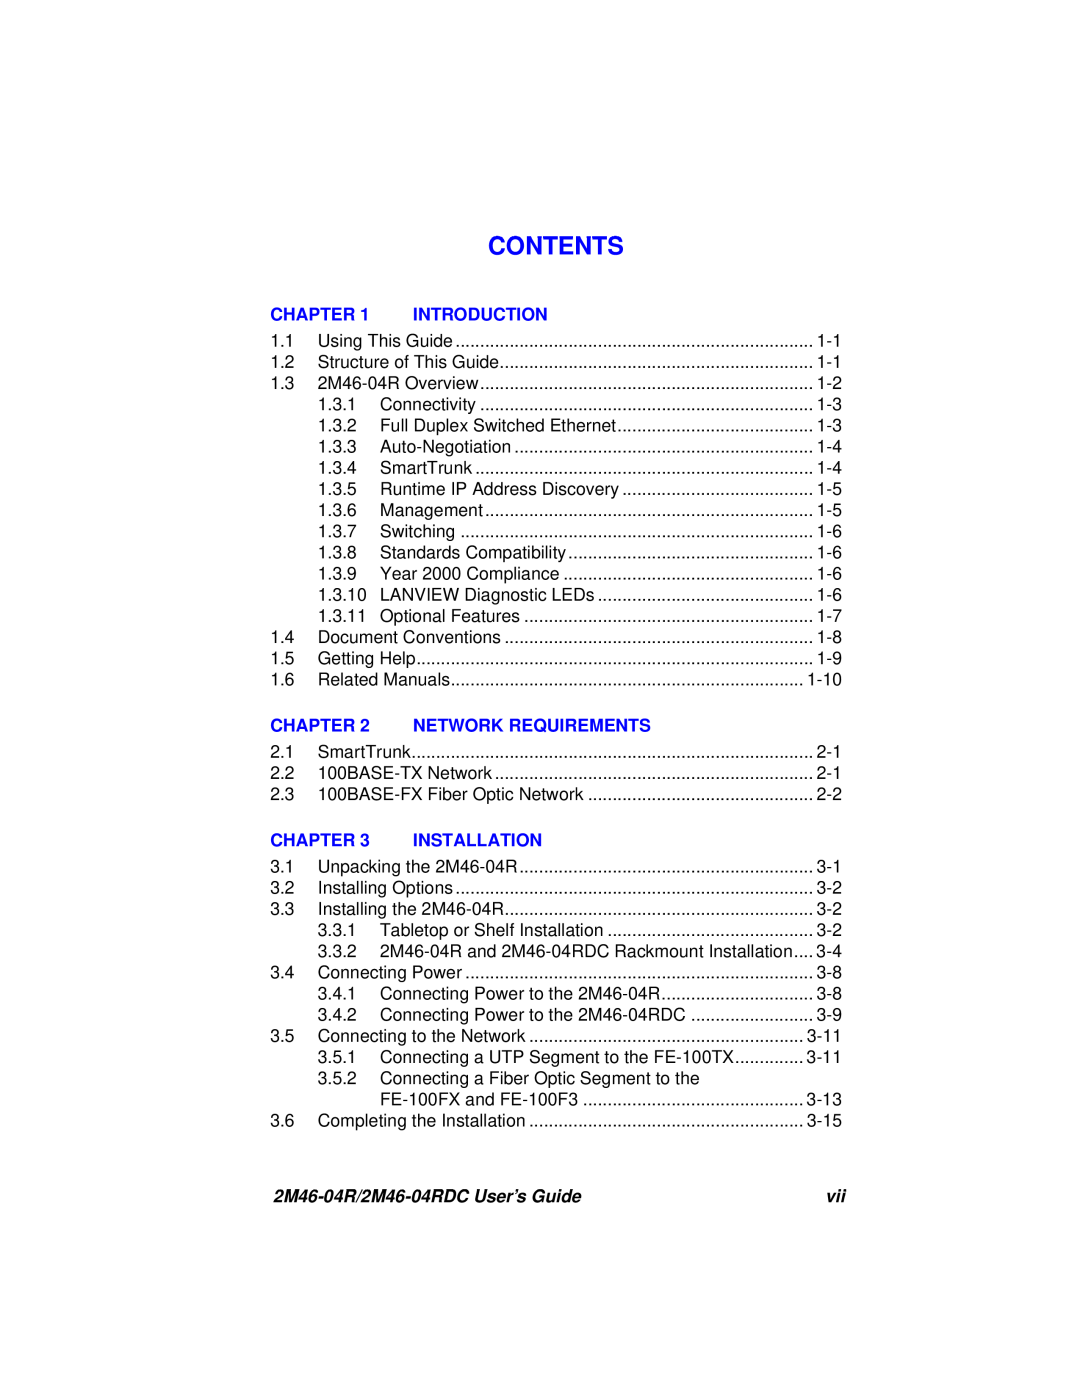 Cabletron Systems pmn manual Contents, Chapter, Introduction, Network Requirements, Installation 